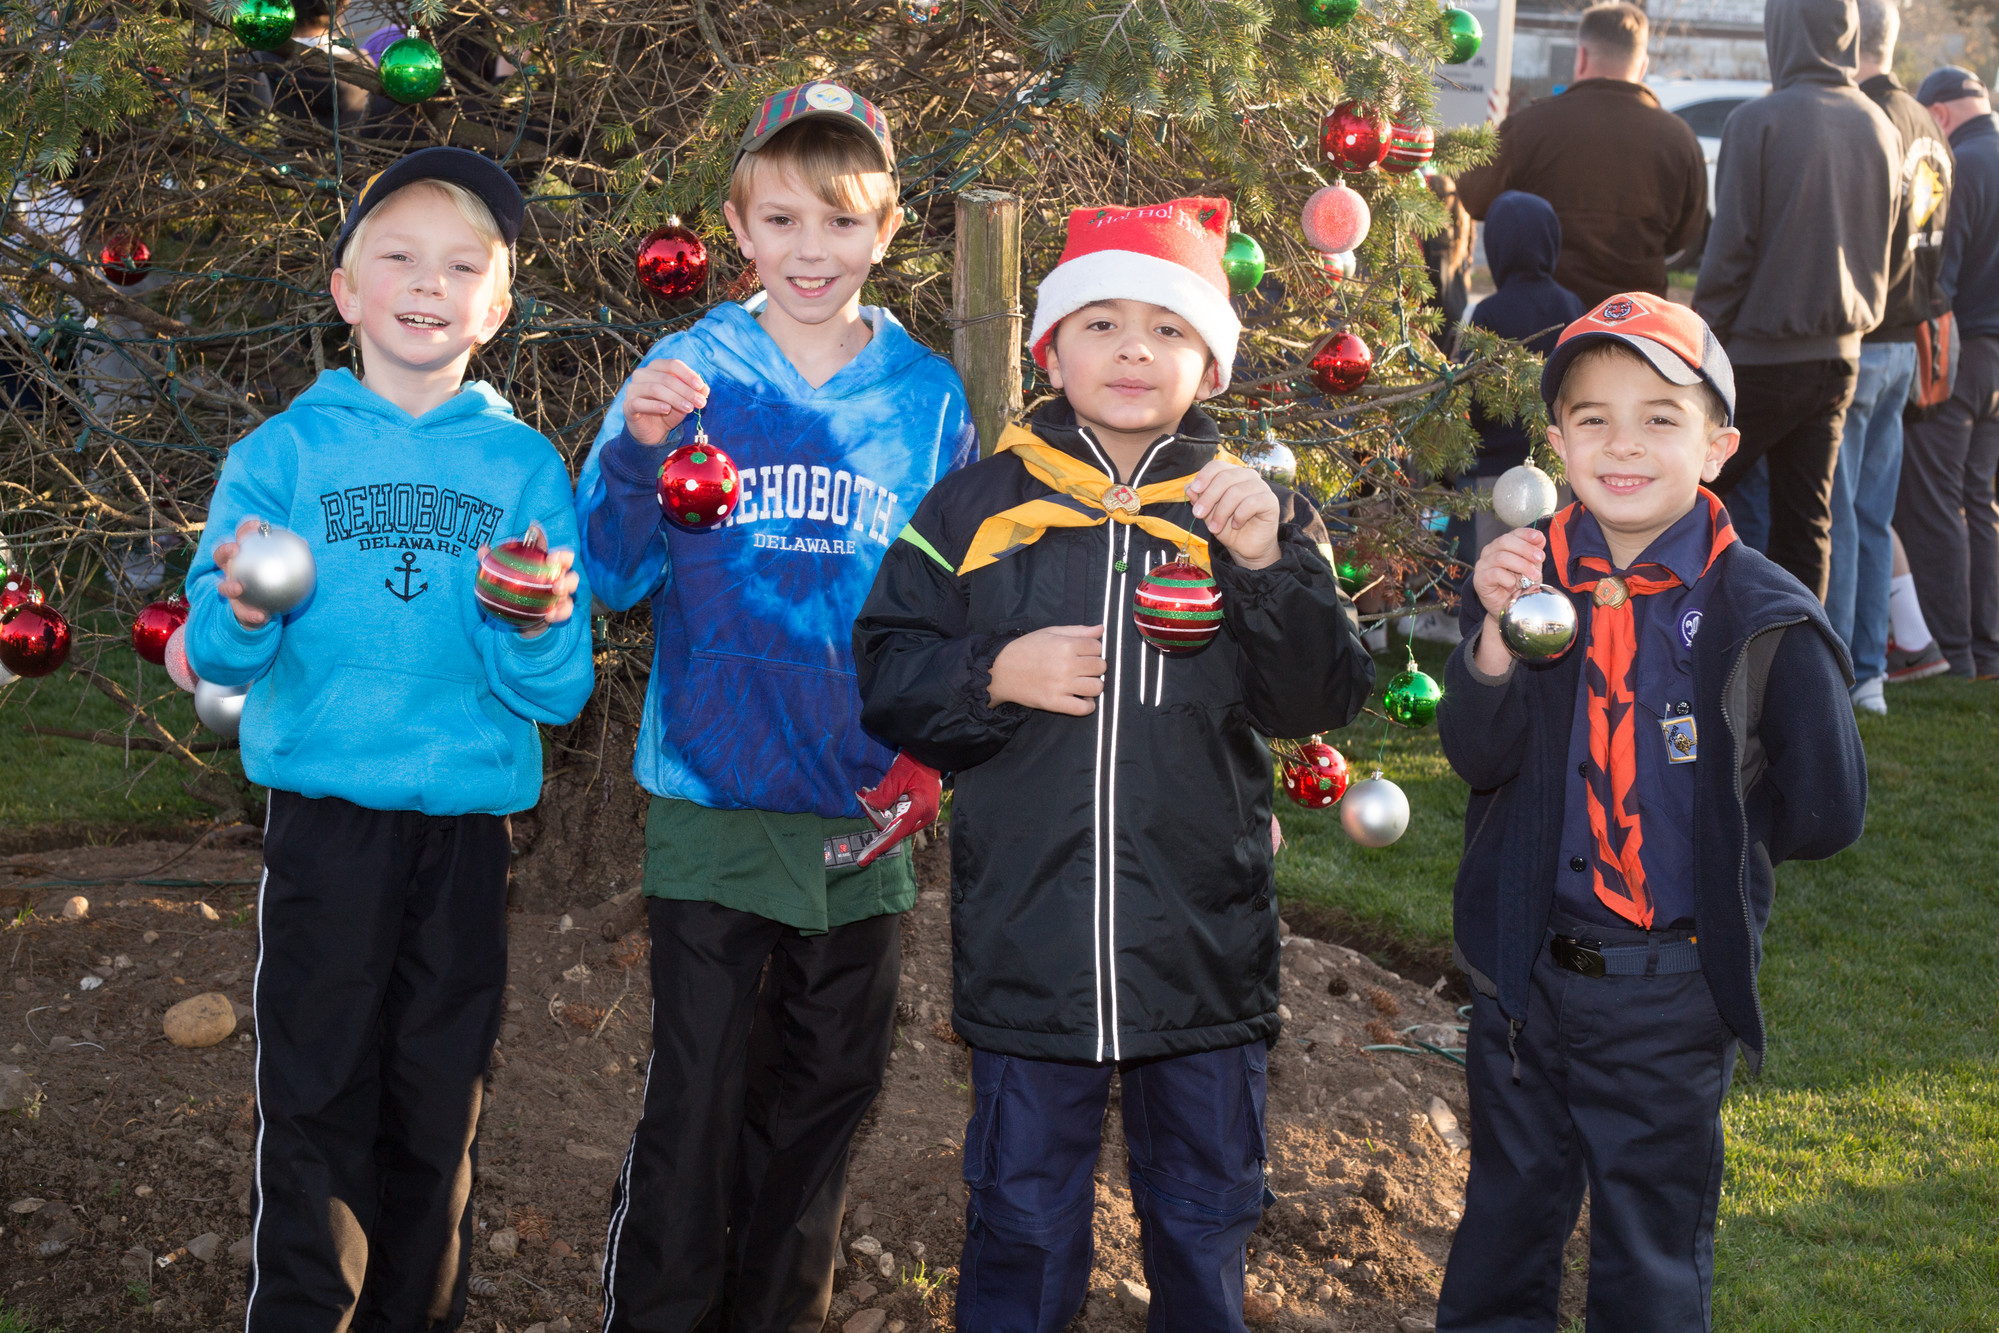 Cub Scouts from Pack 691 at Maria Regina School, from left, Drew Houck, Daniel Houck, David Monaco and Nicholas Ahrens helped decorate the tree at Triangle Park.